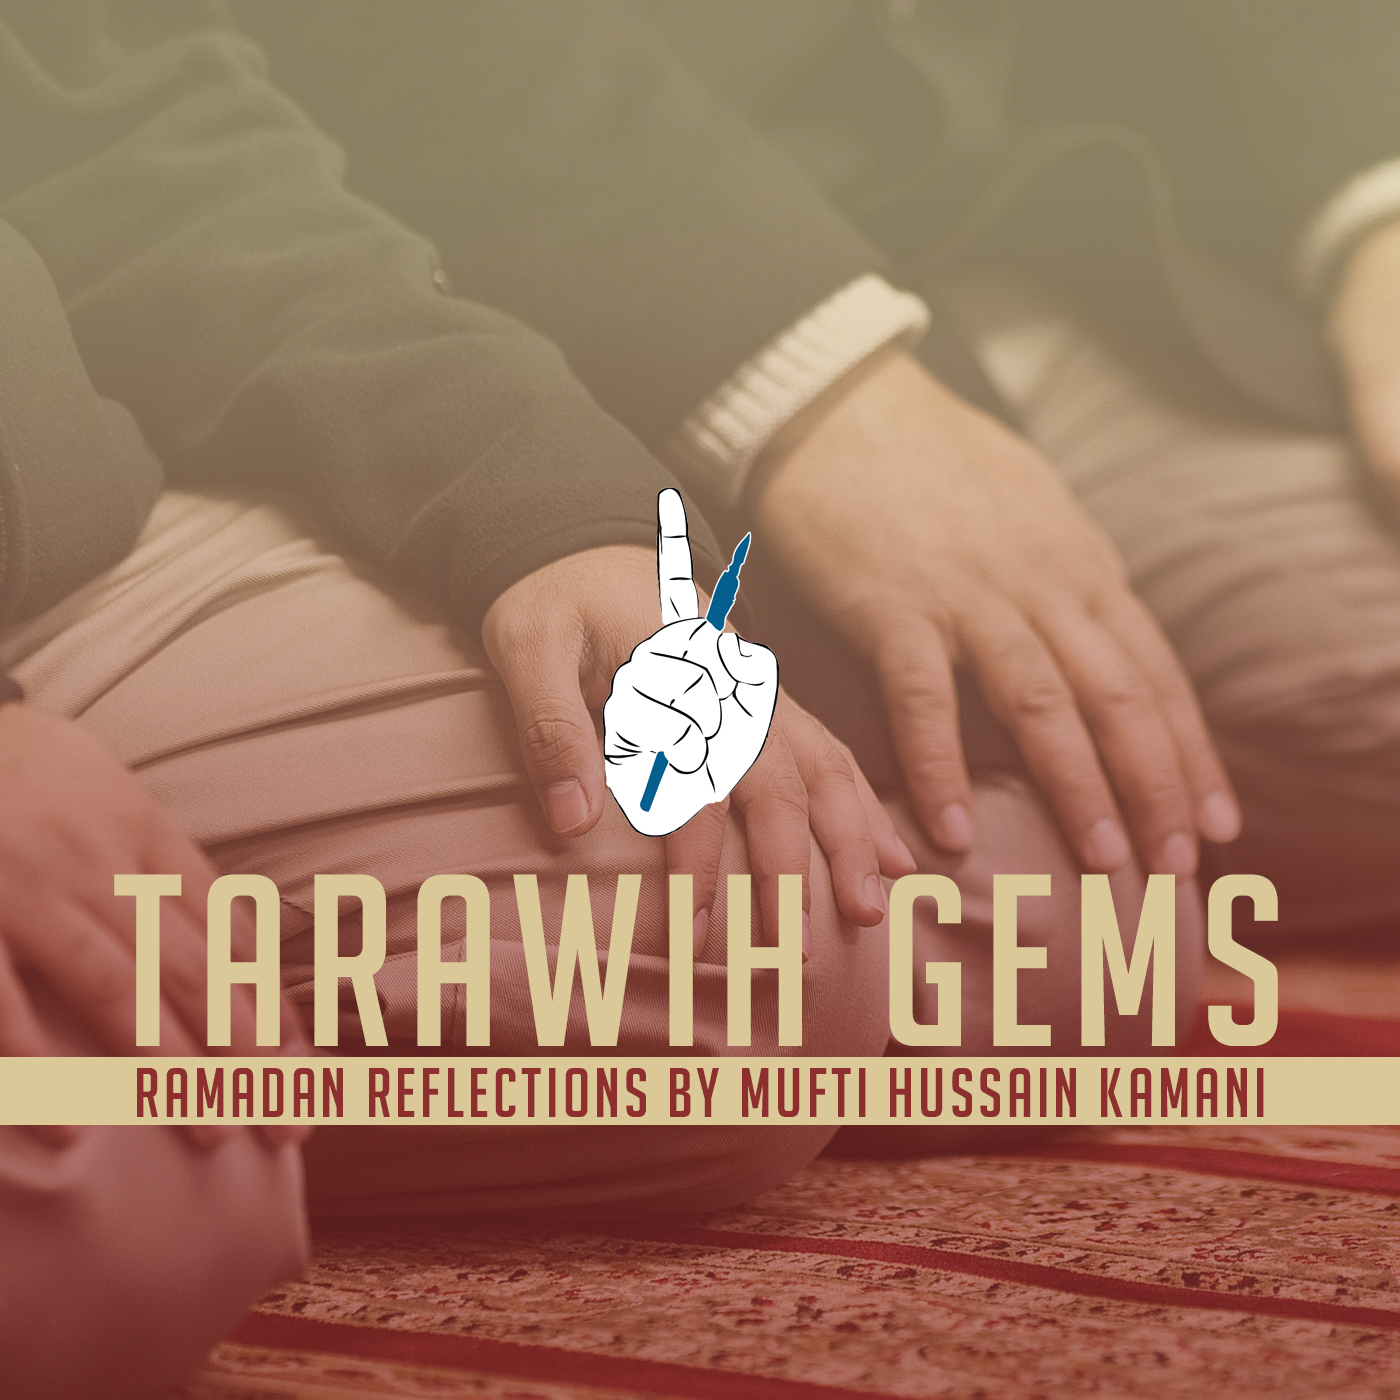 Tarawih Gems – The Book That Never Ends